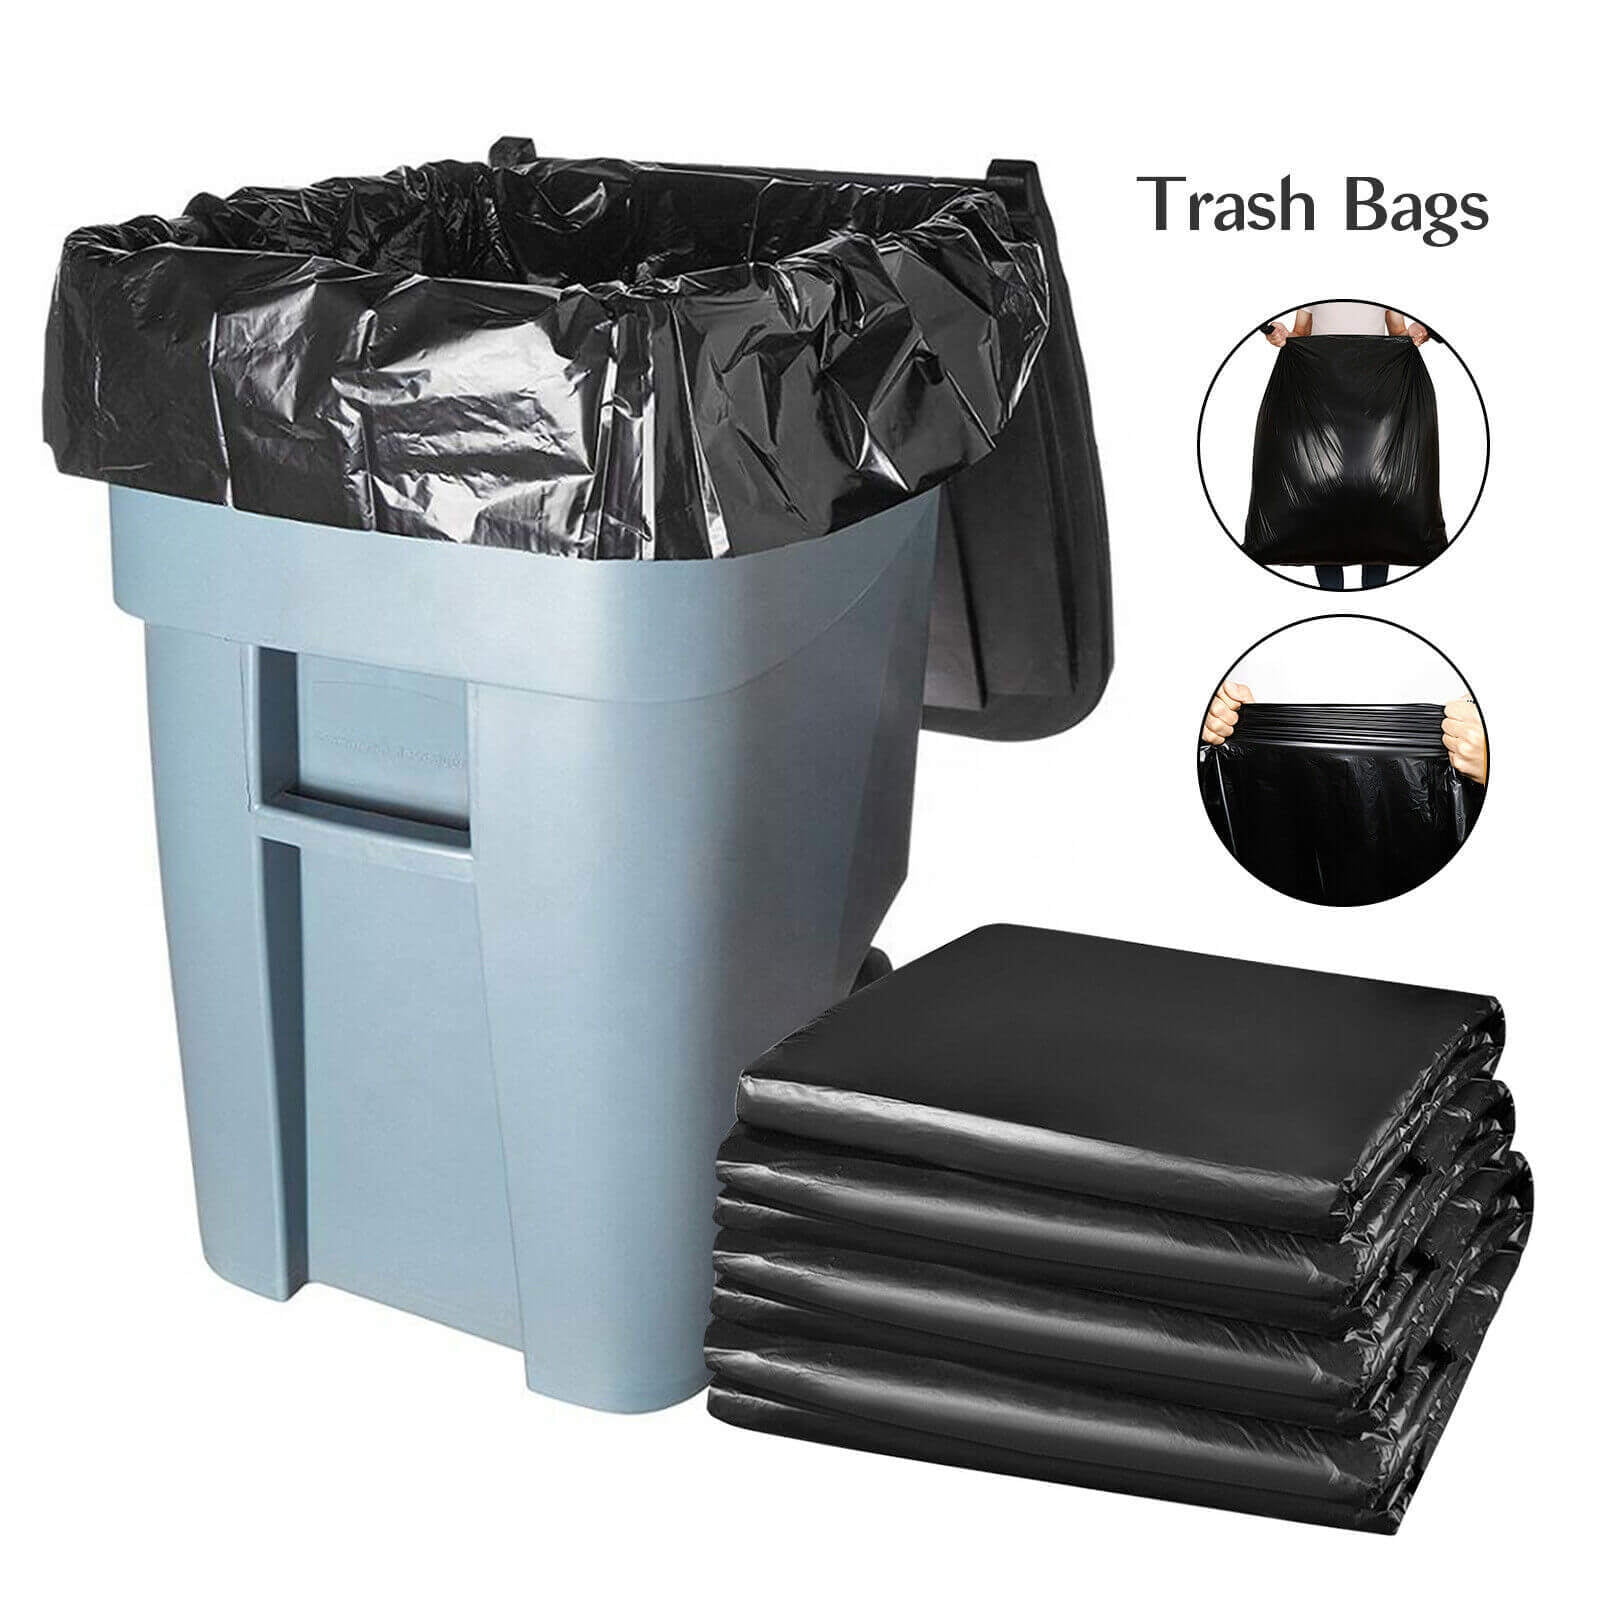 65 Gallon Trash Bags25 Pack Extra-large Black Heavy Duty Trash Can  LinersTras